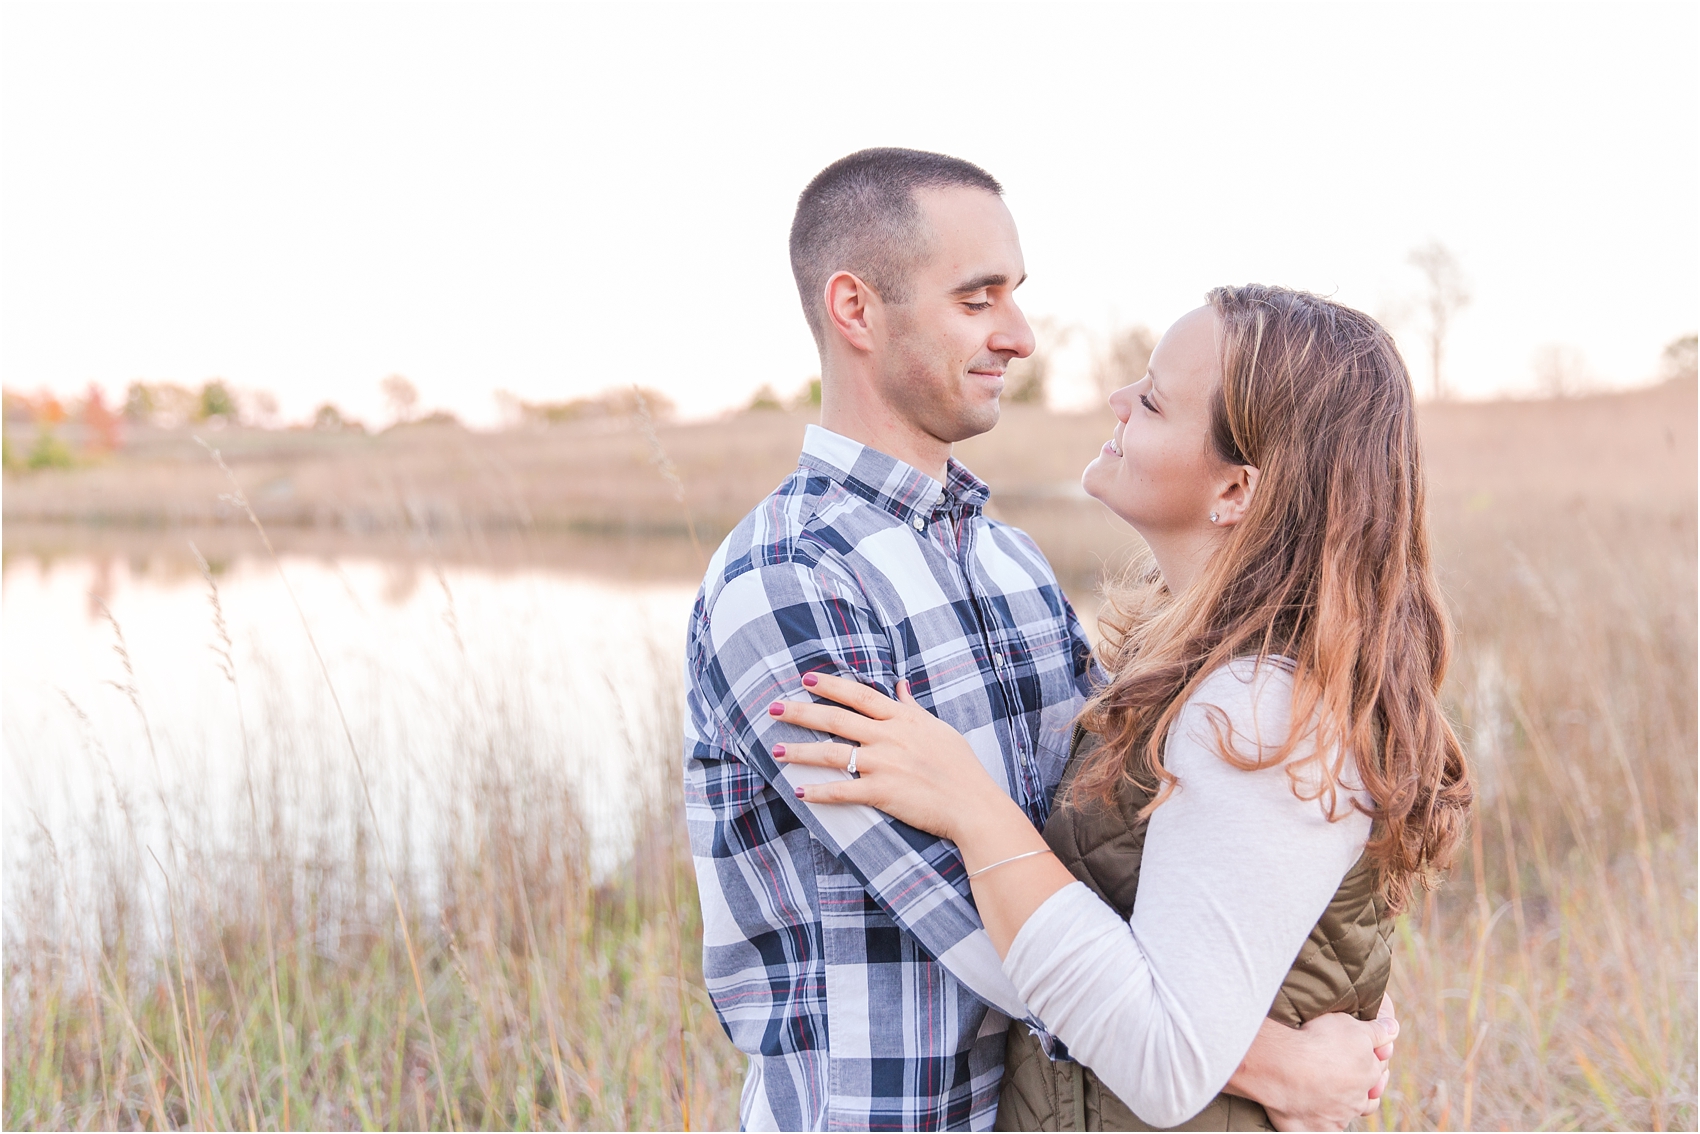 romantic-fall-engagement-photos-at-indian-springs-metropark-in-clarkston-mi-by-courtney-carolyn-photography_0034.jpg